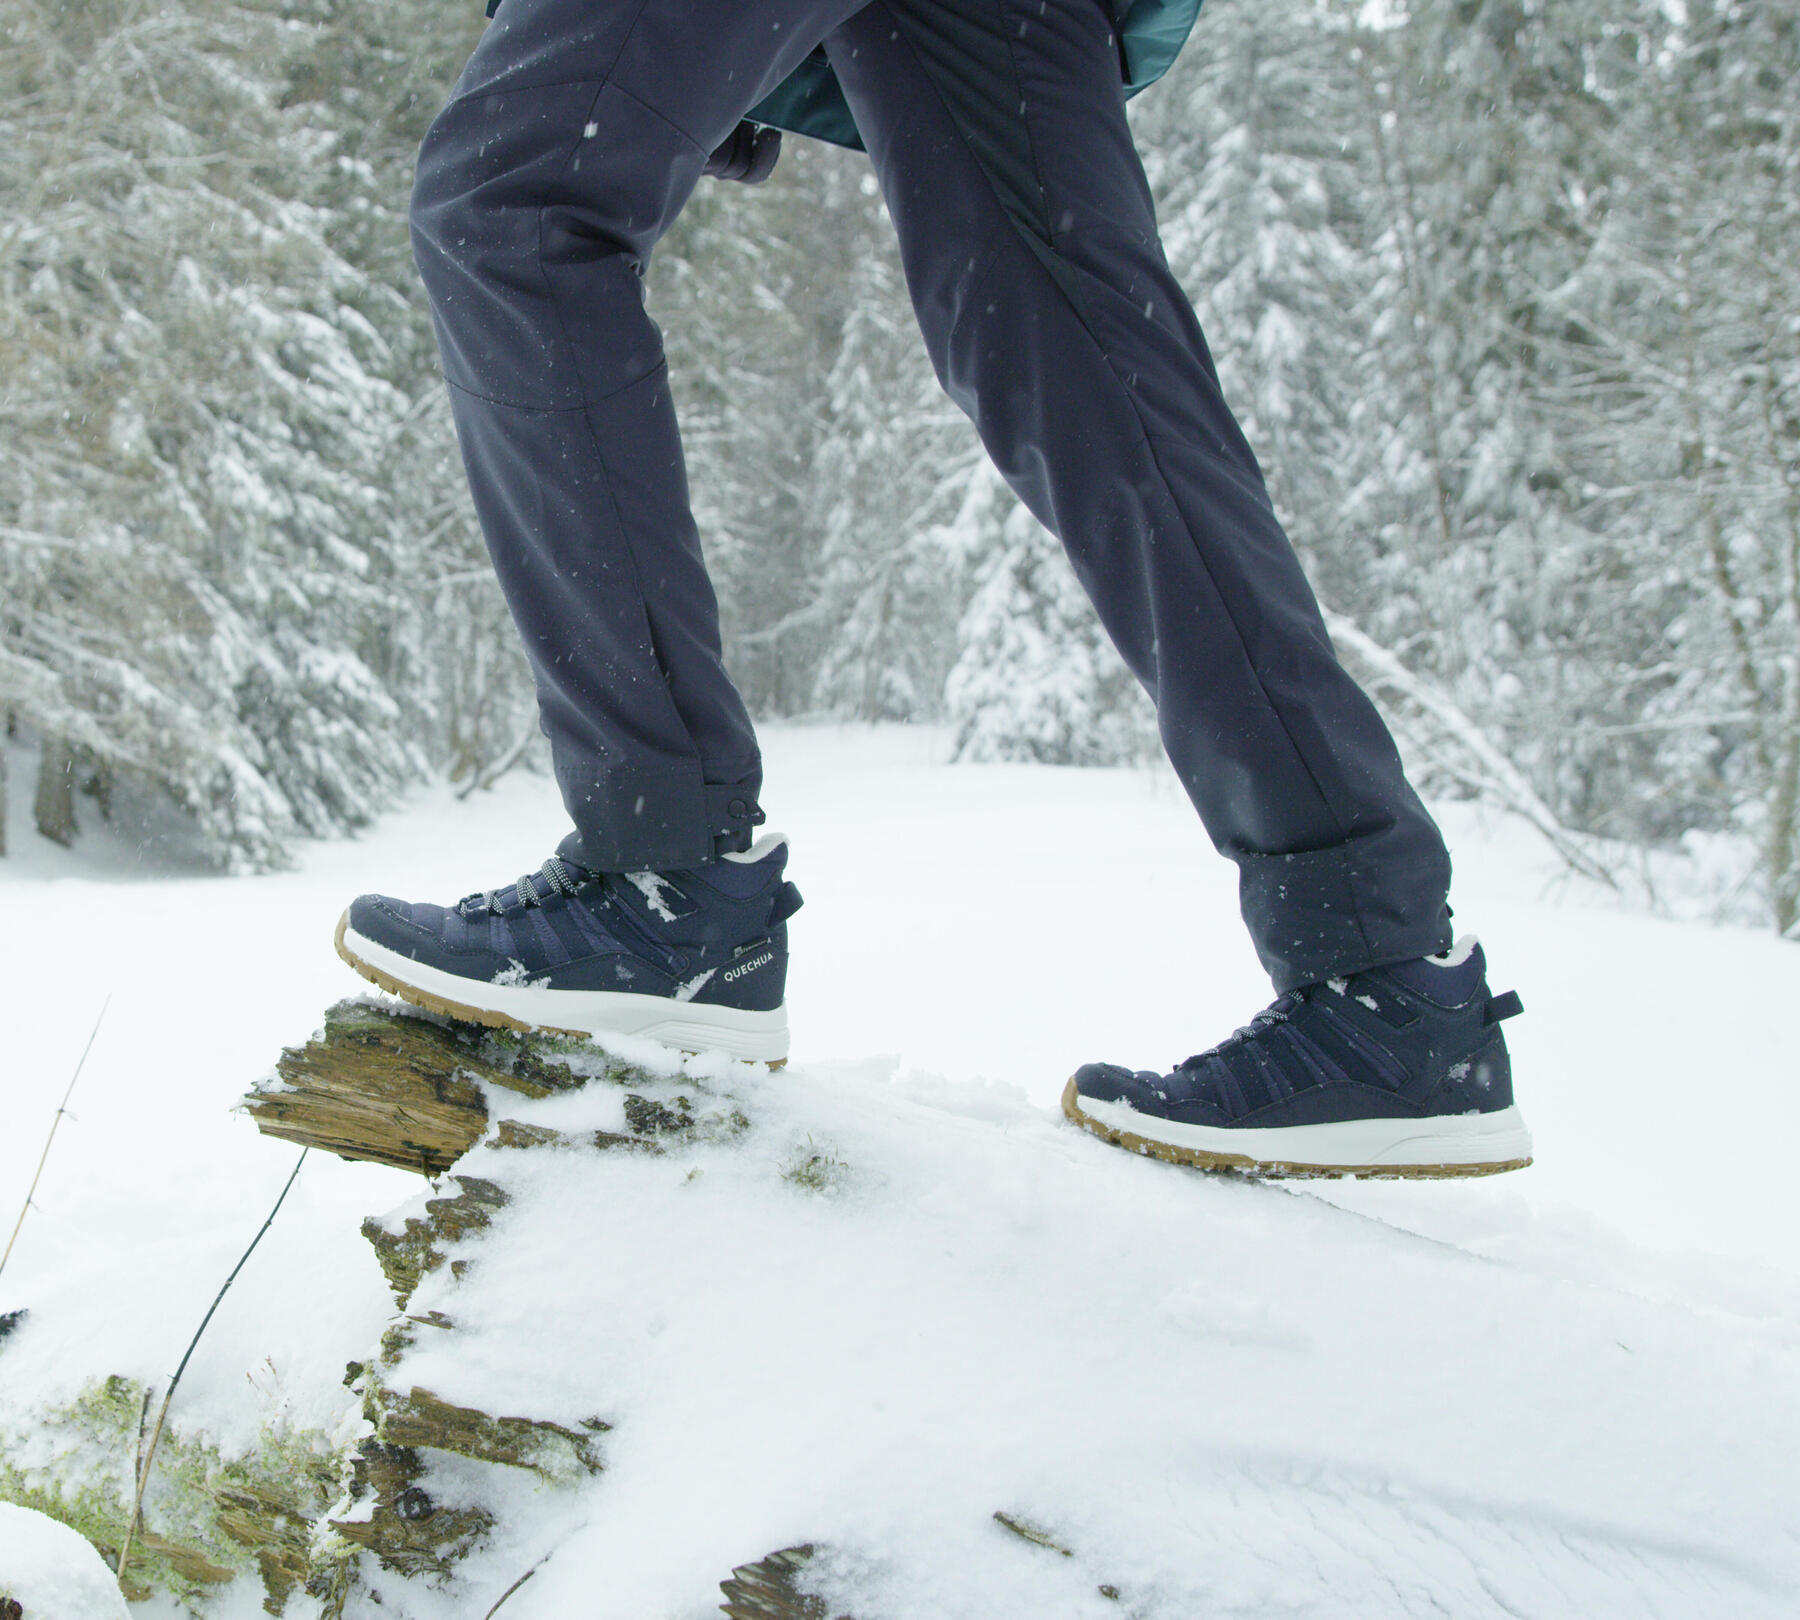 How to Choose the Best Pair of Winter Boots